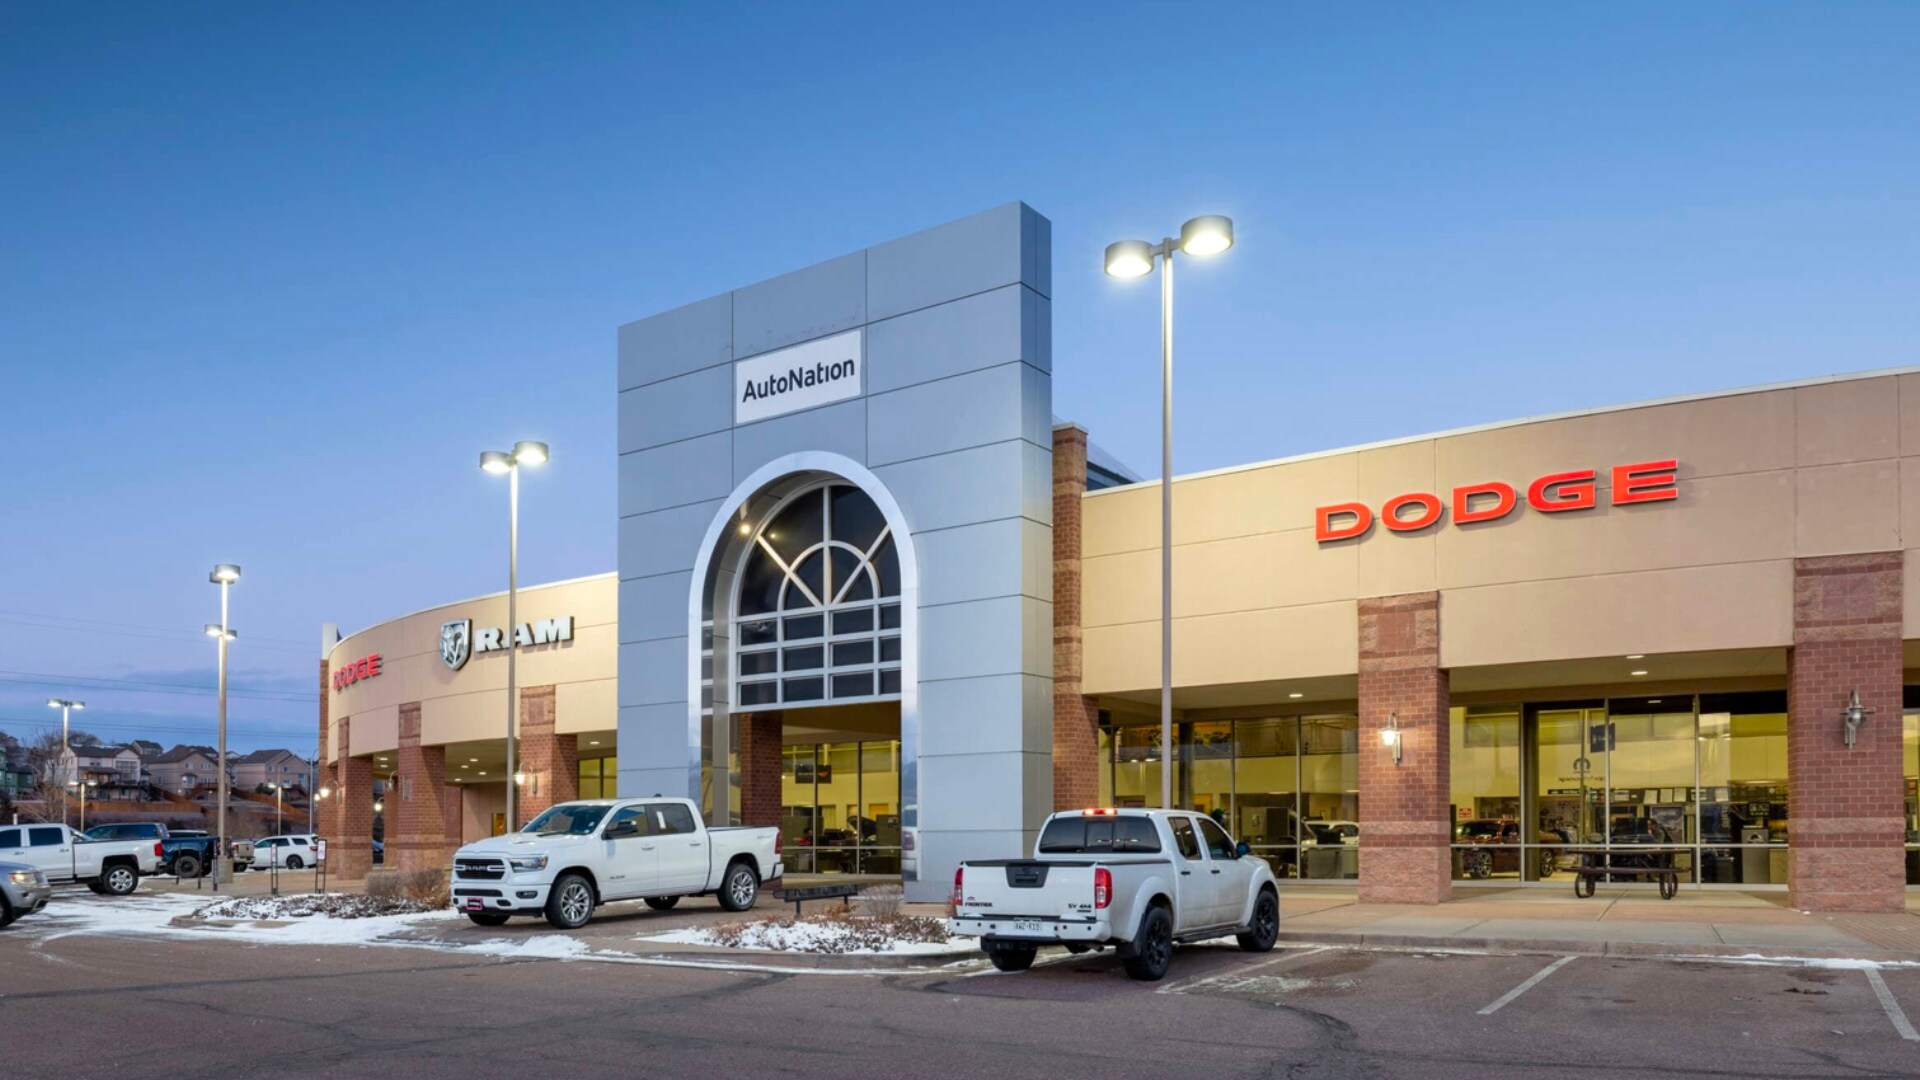 Exterior view of AutoNation Dodge Ram Colorado Springs. There is a blue sky and many vehicles parked near the grey building. Small amounts of snow can be sean near the building.